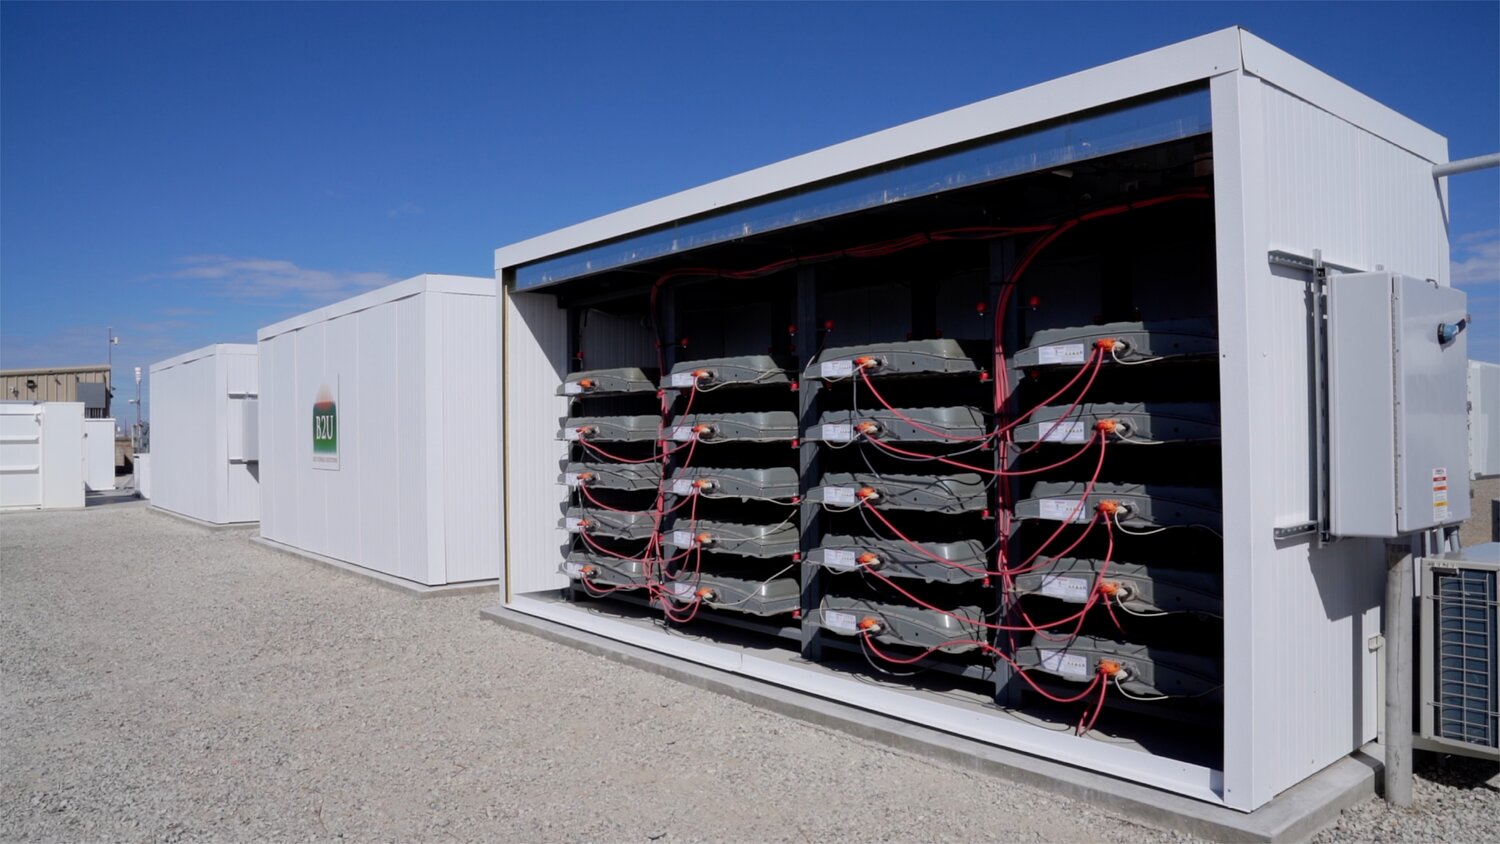 Old EV batteries are being reused as energy storage devices in CA